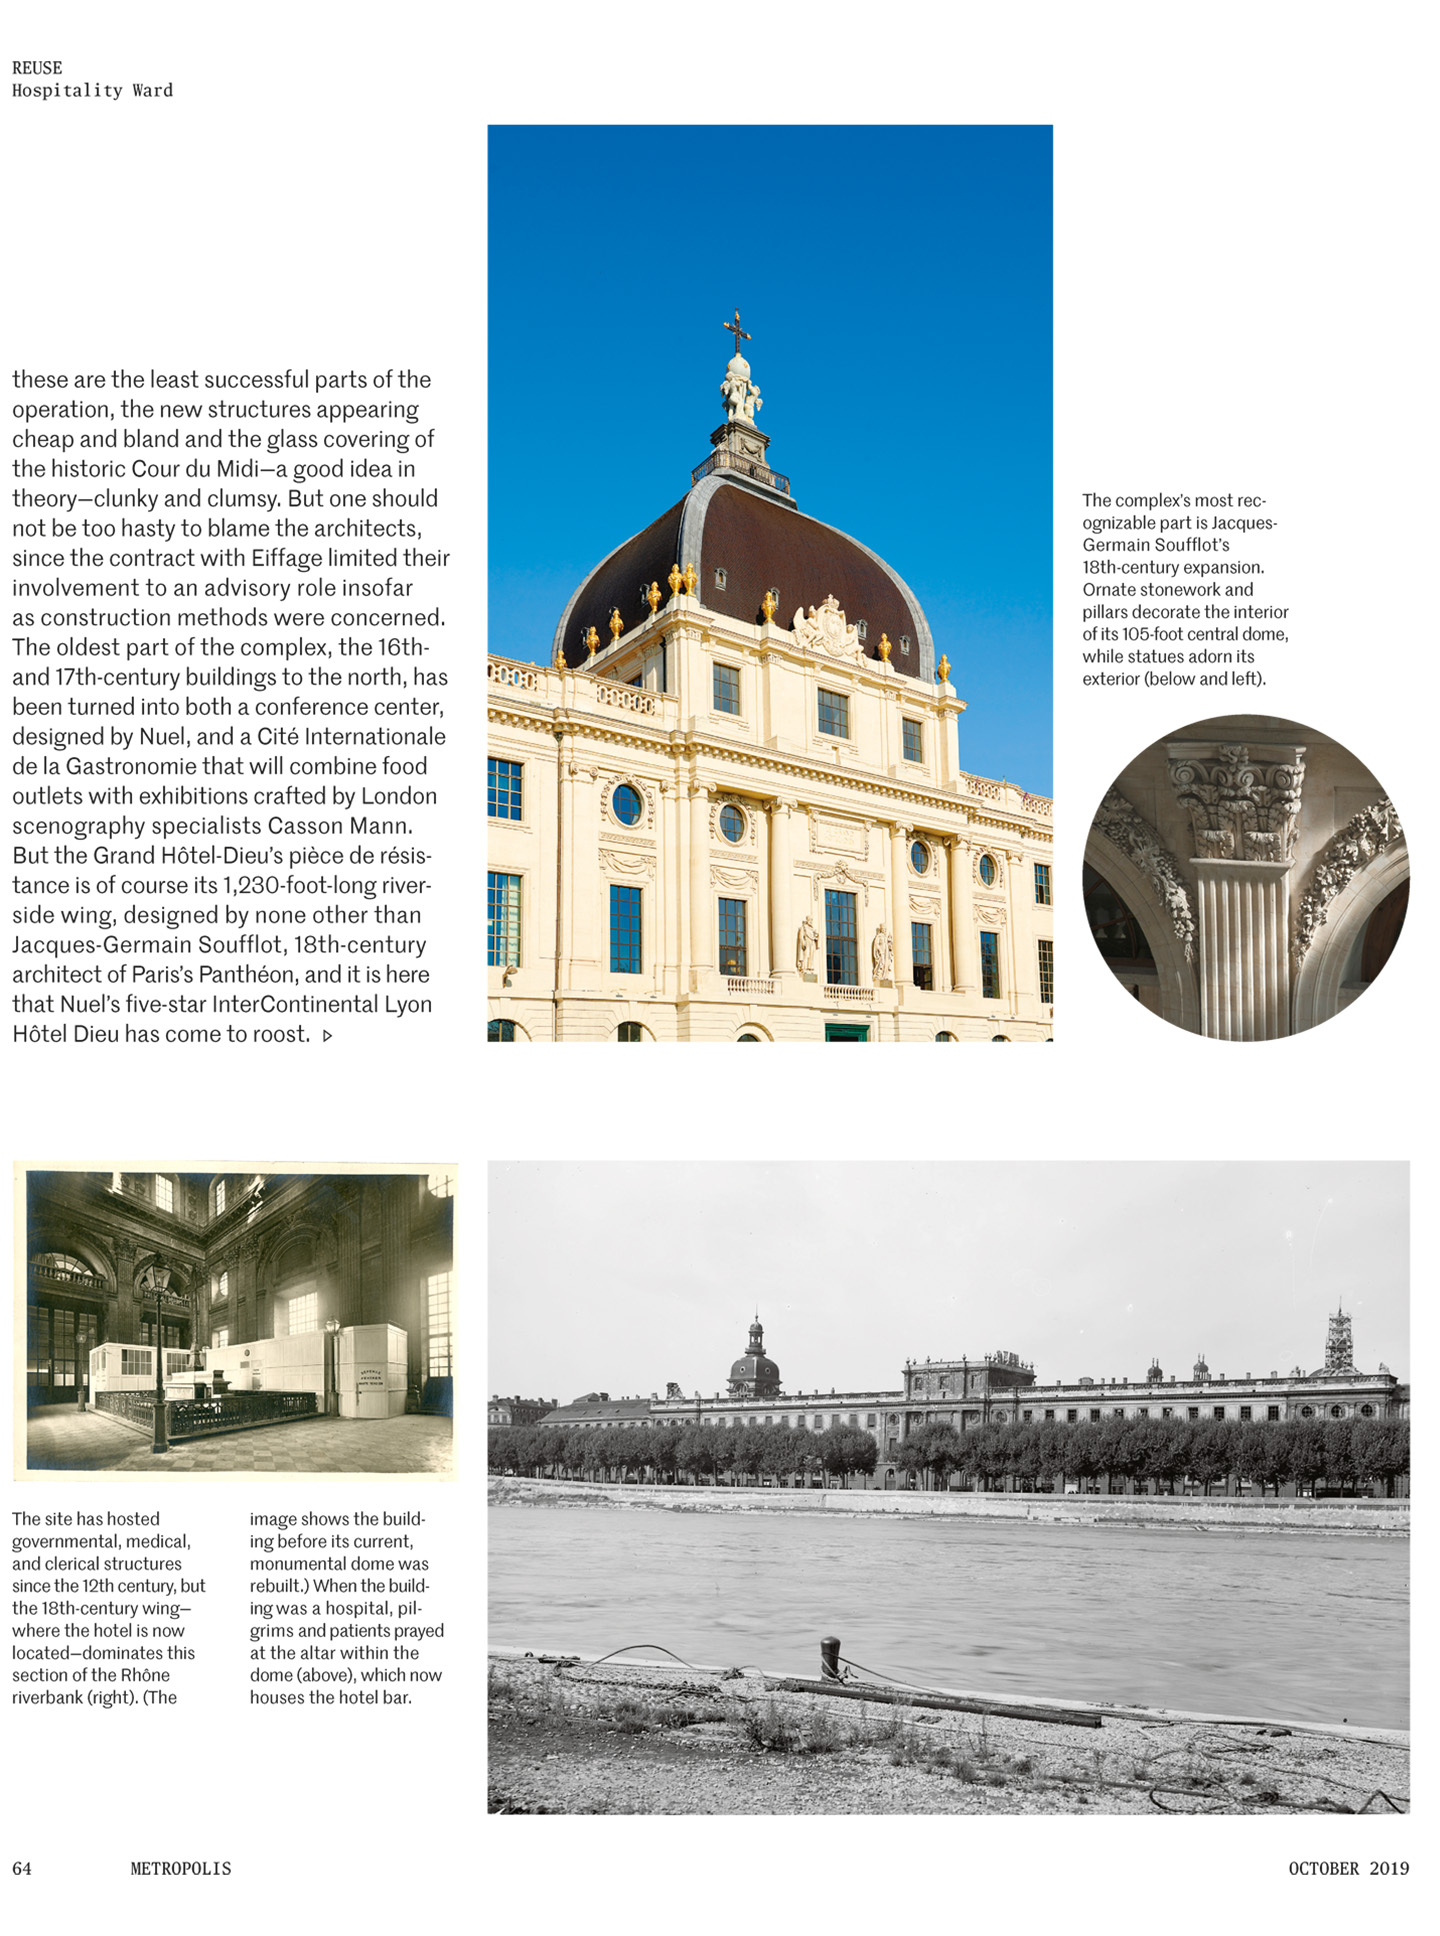 Article on the InterContinental Lyon Hotel Dieu realized by the studio jean-Philippe Nuel in the magazine Metropolis, new luxury hotel, luxury interior design, historical heritage